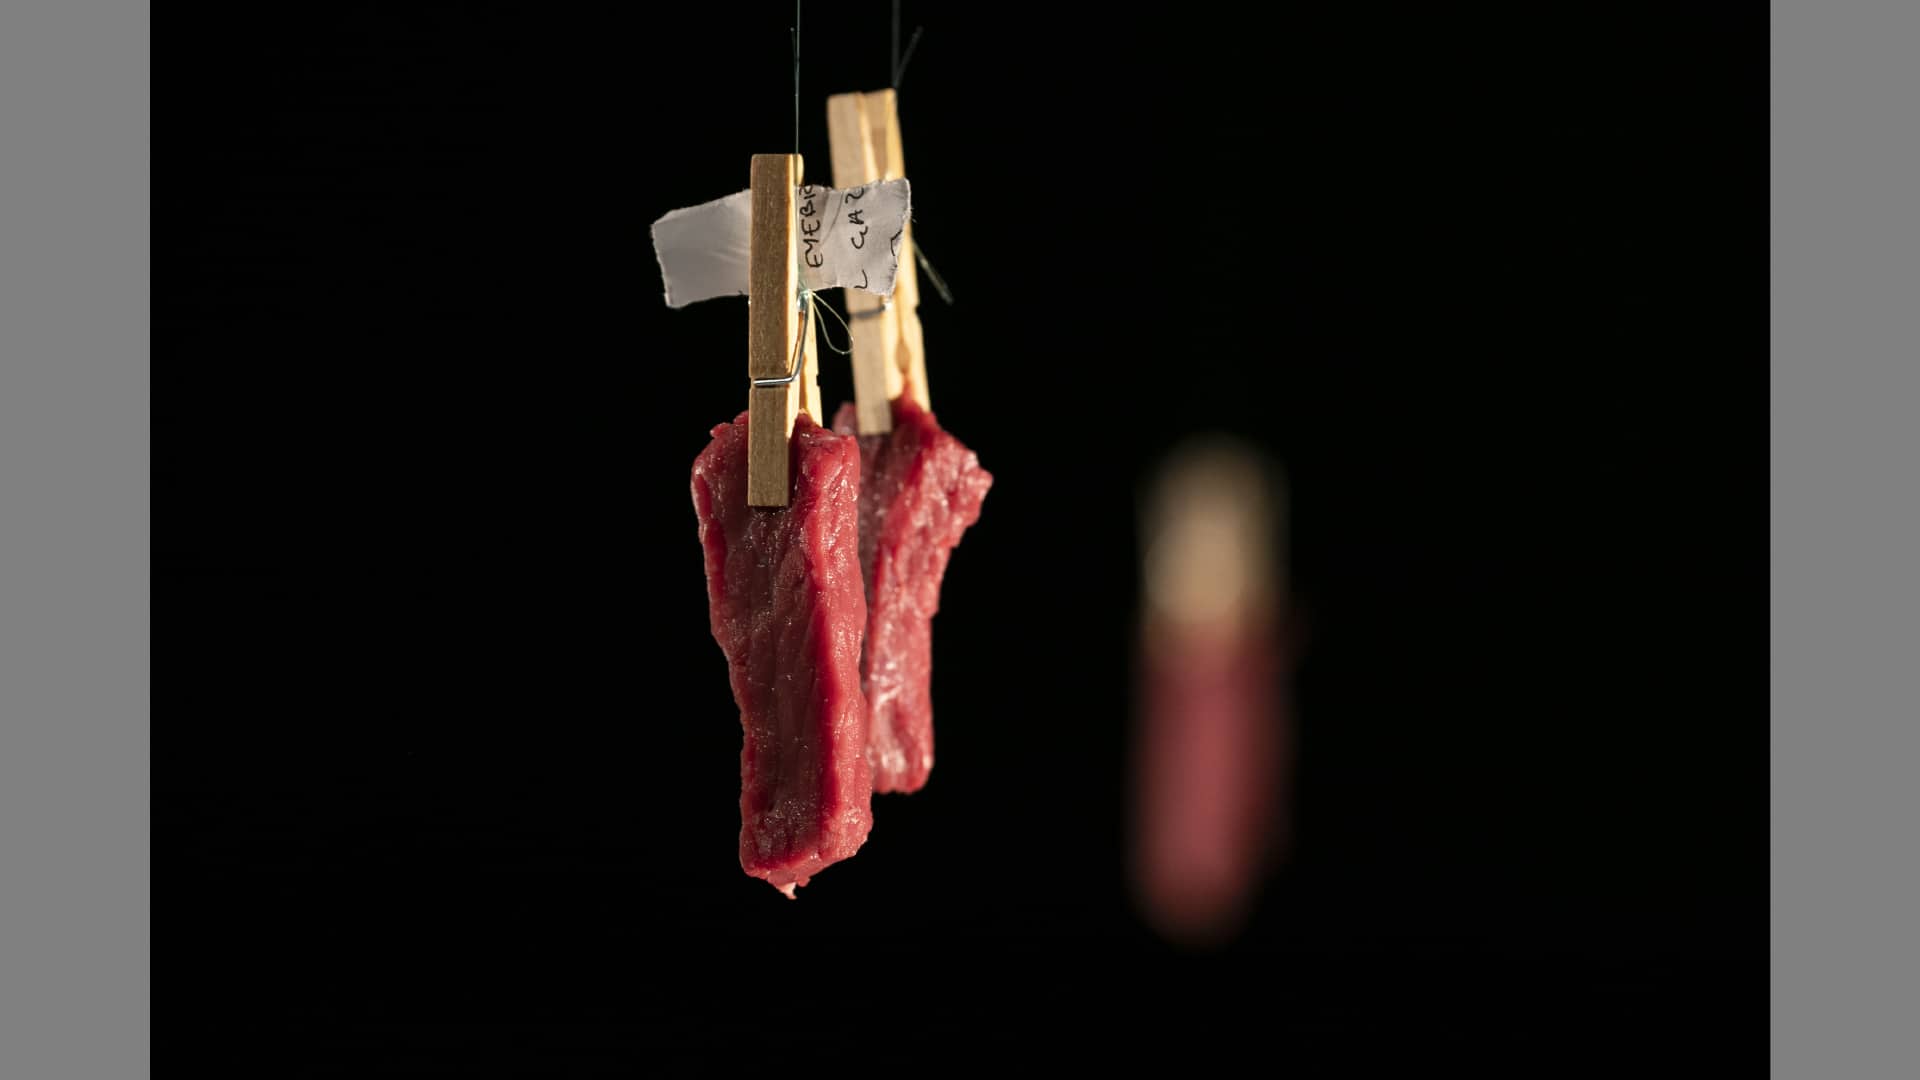 Two pieces of raw meat hang from a line, pinned by wooden pegs